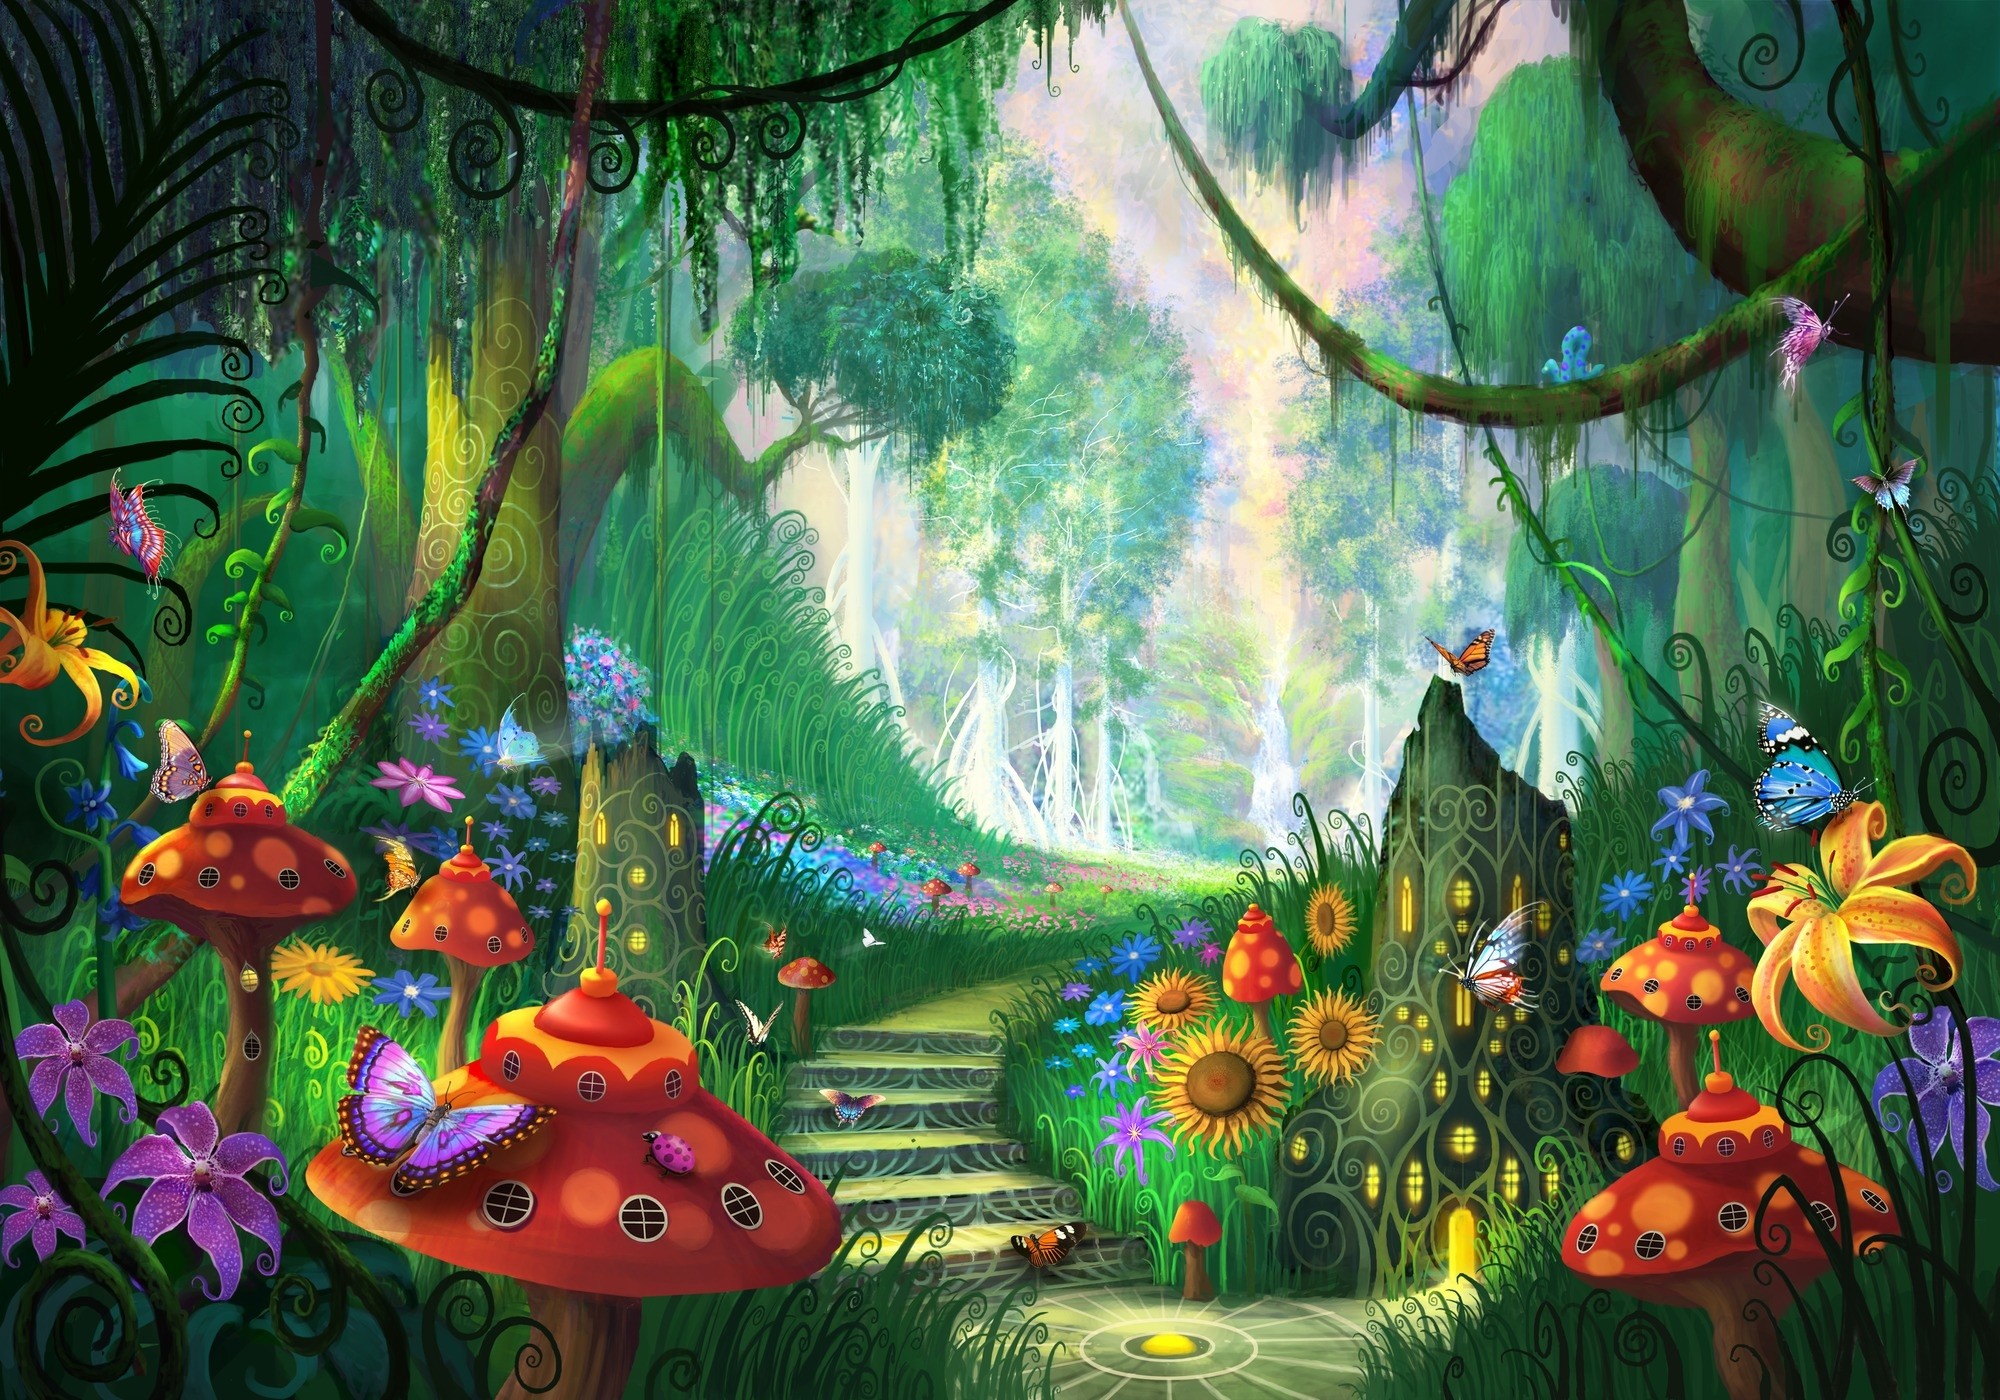 2000x1400 ... Home Design : Enchanted Forest Wall Murals Nursery Landscape  Contractors enchanted forest wall murals intended for ...